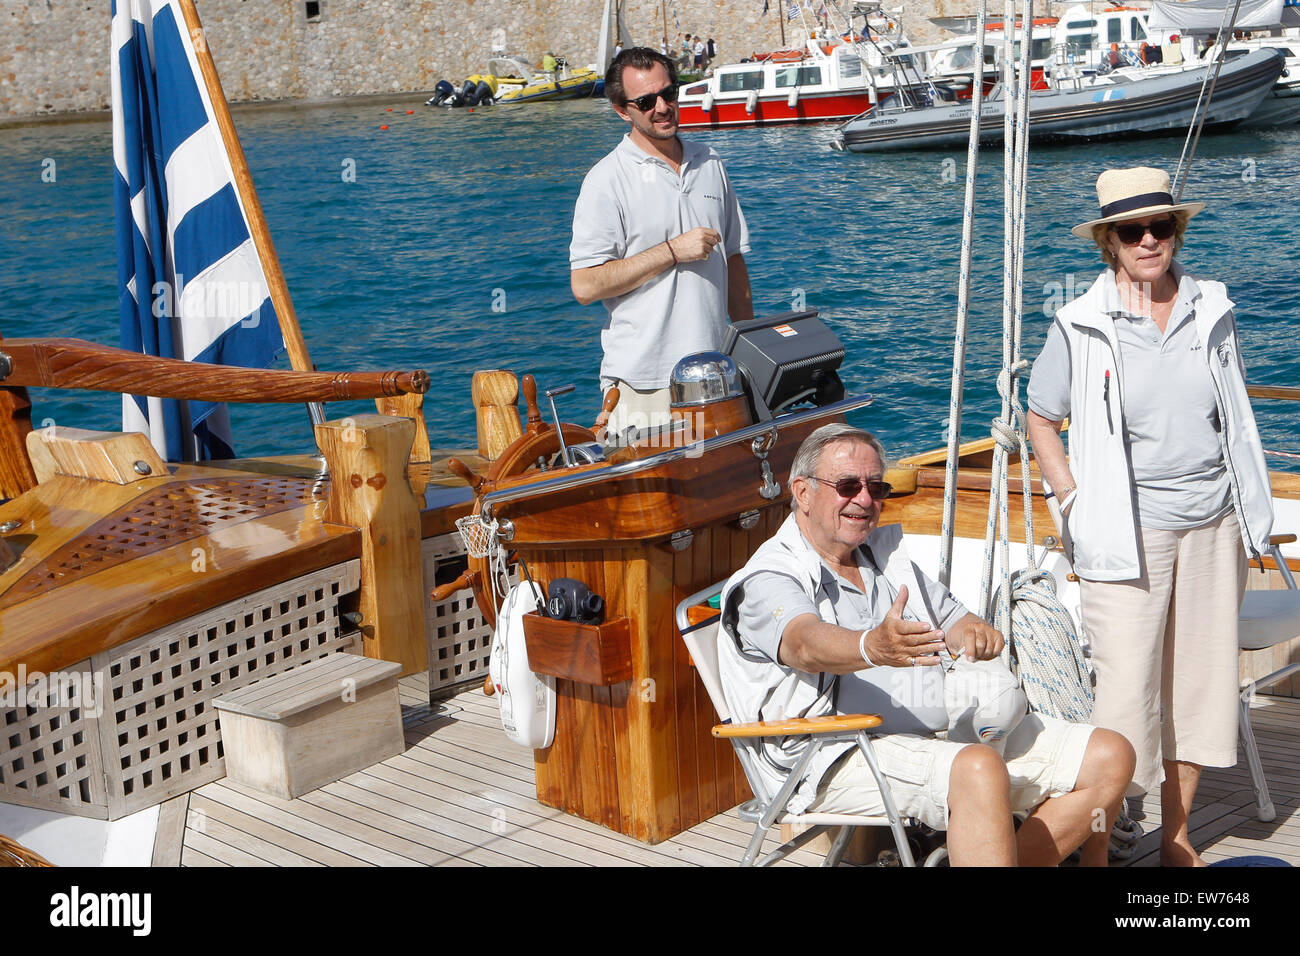 Spetses Island, GREECE. 19th June, 2015. King Constantine of Greece, Queen Anne-Marie of Greece and their son Prince Nikolaos on their traditional boat ''Afroessa at the port of Spetses island during the ''Spetses Classic Yacht Race Regatta' Credit:  Aristidis Vafeiadakis/ZUMA Wire/Alamy Live News Stock Photo